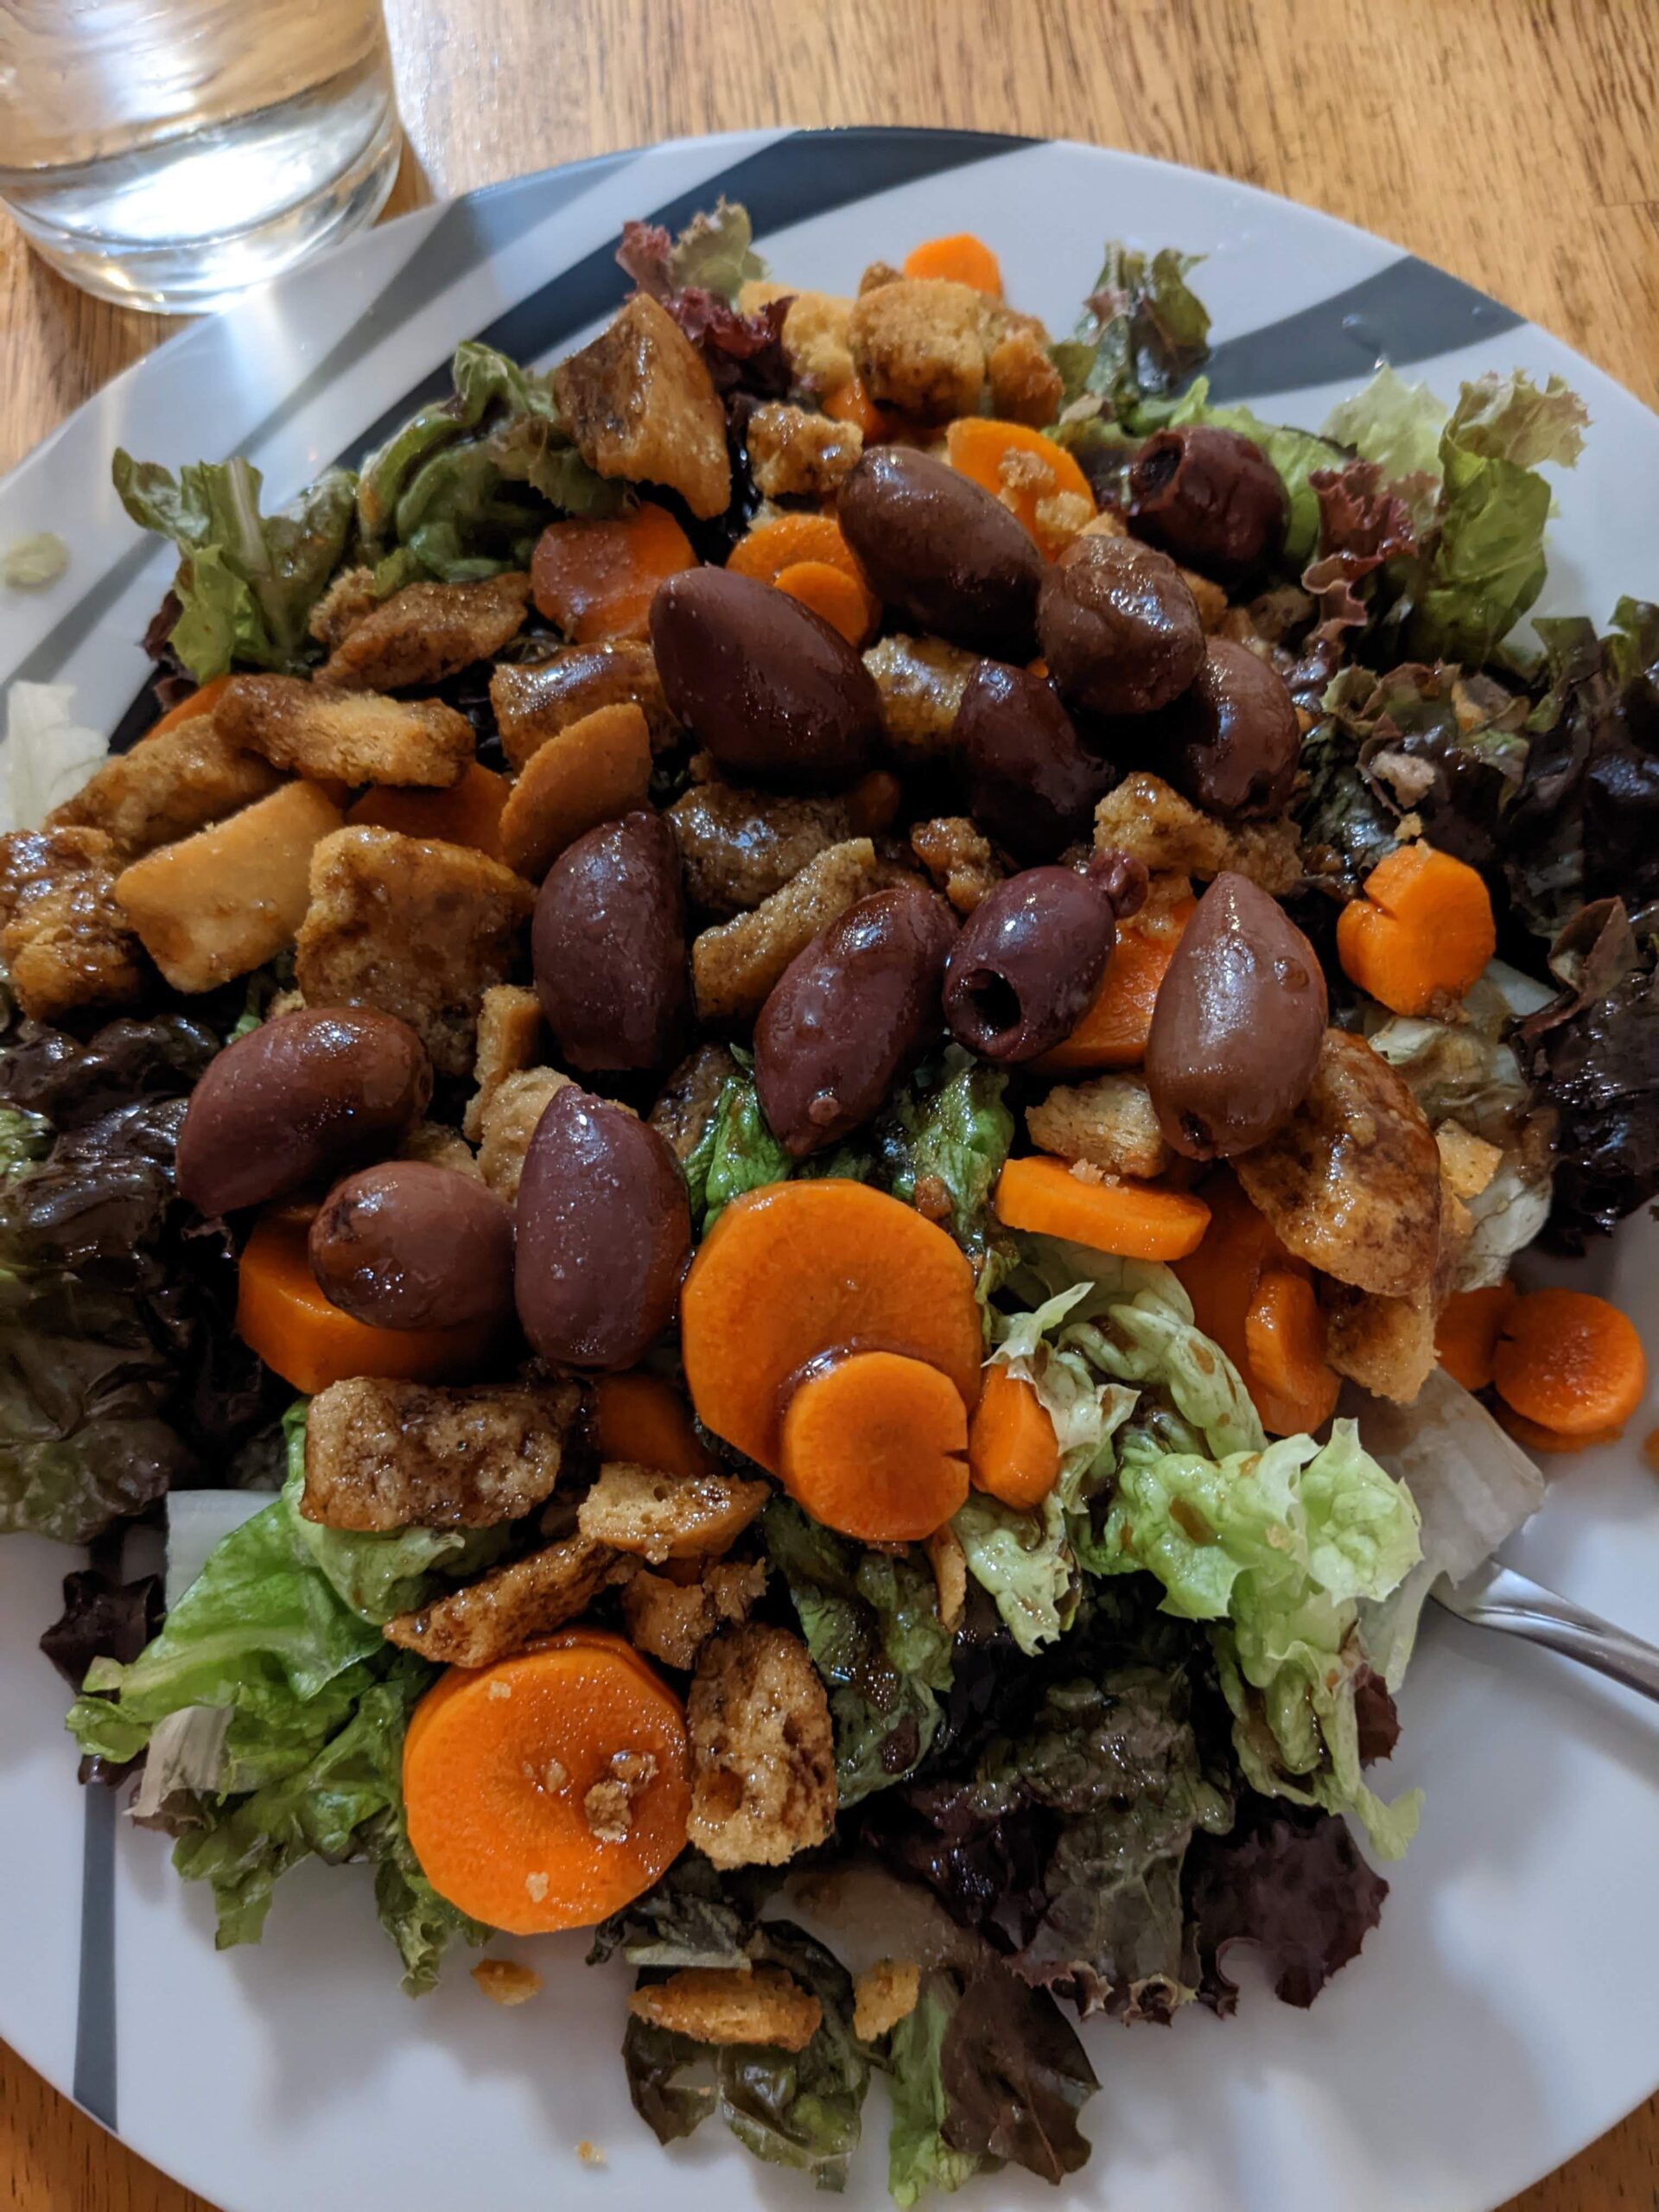 Salad w/Croutons, Carrots, Olives, and Balsamic